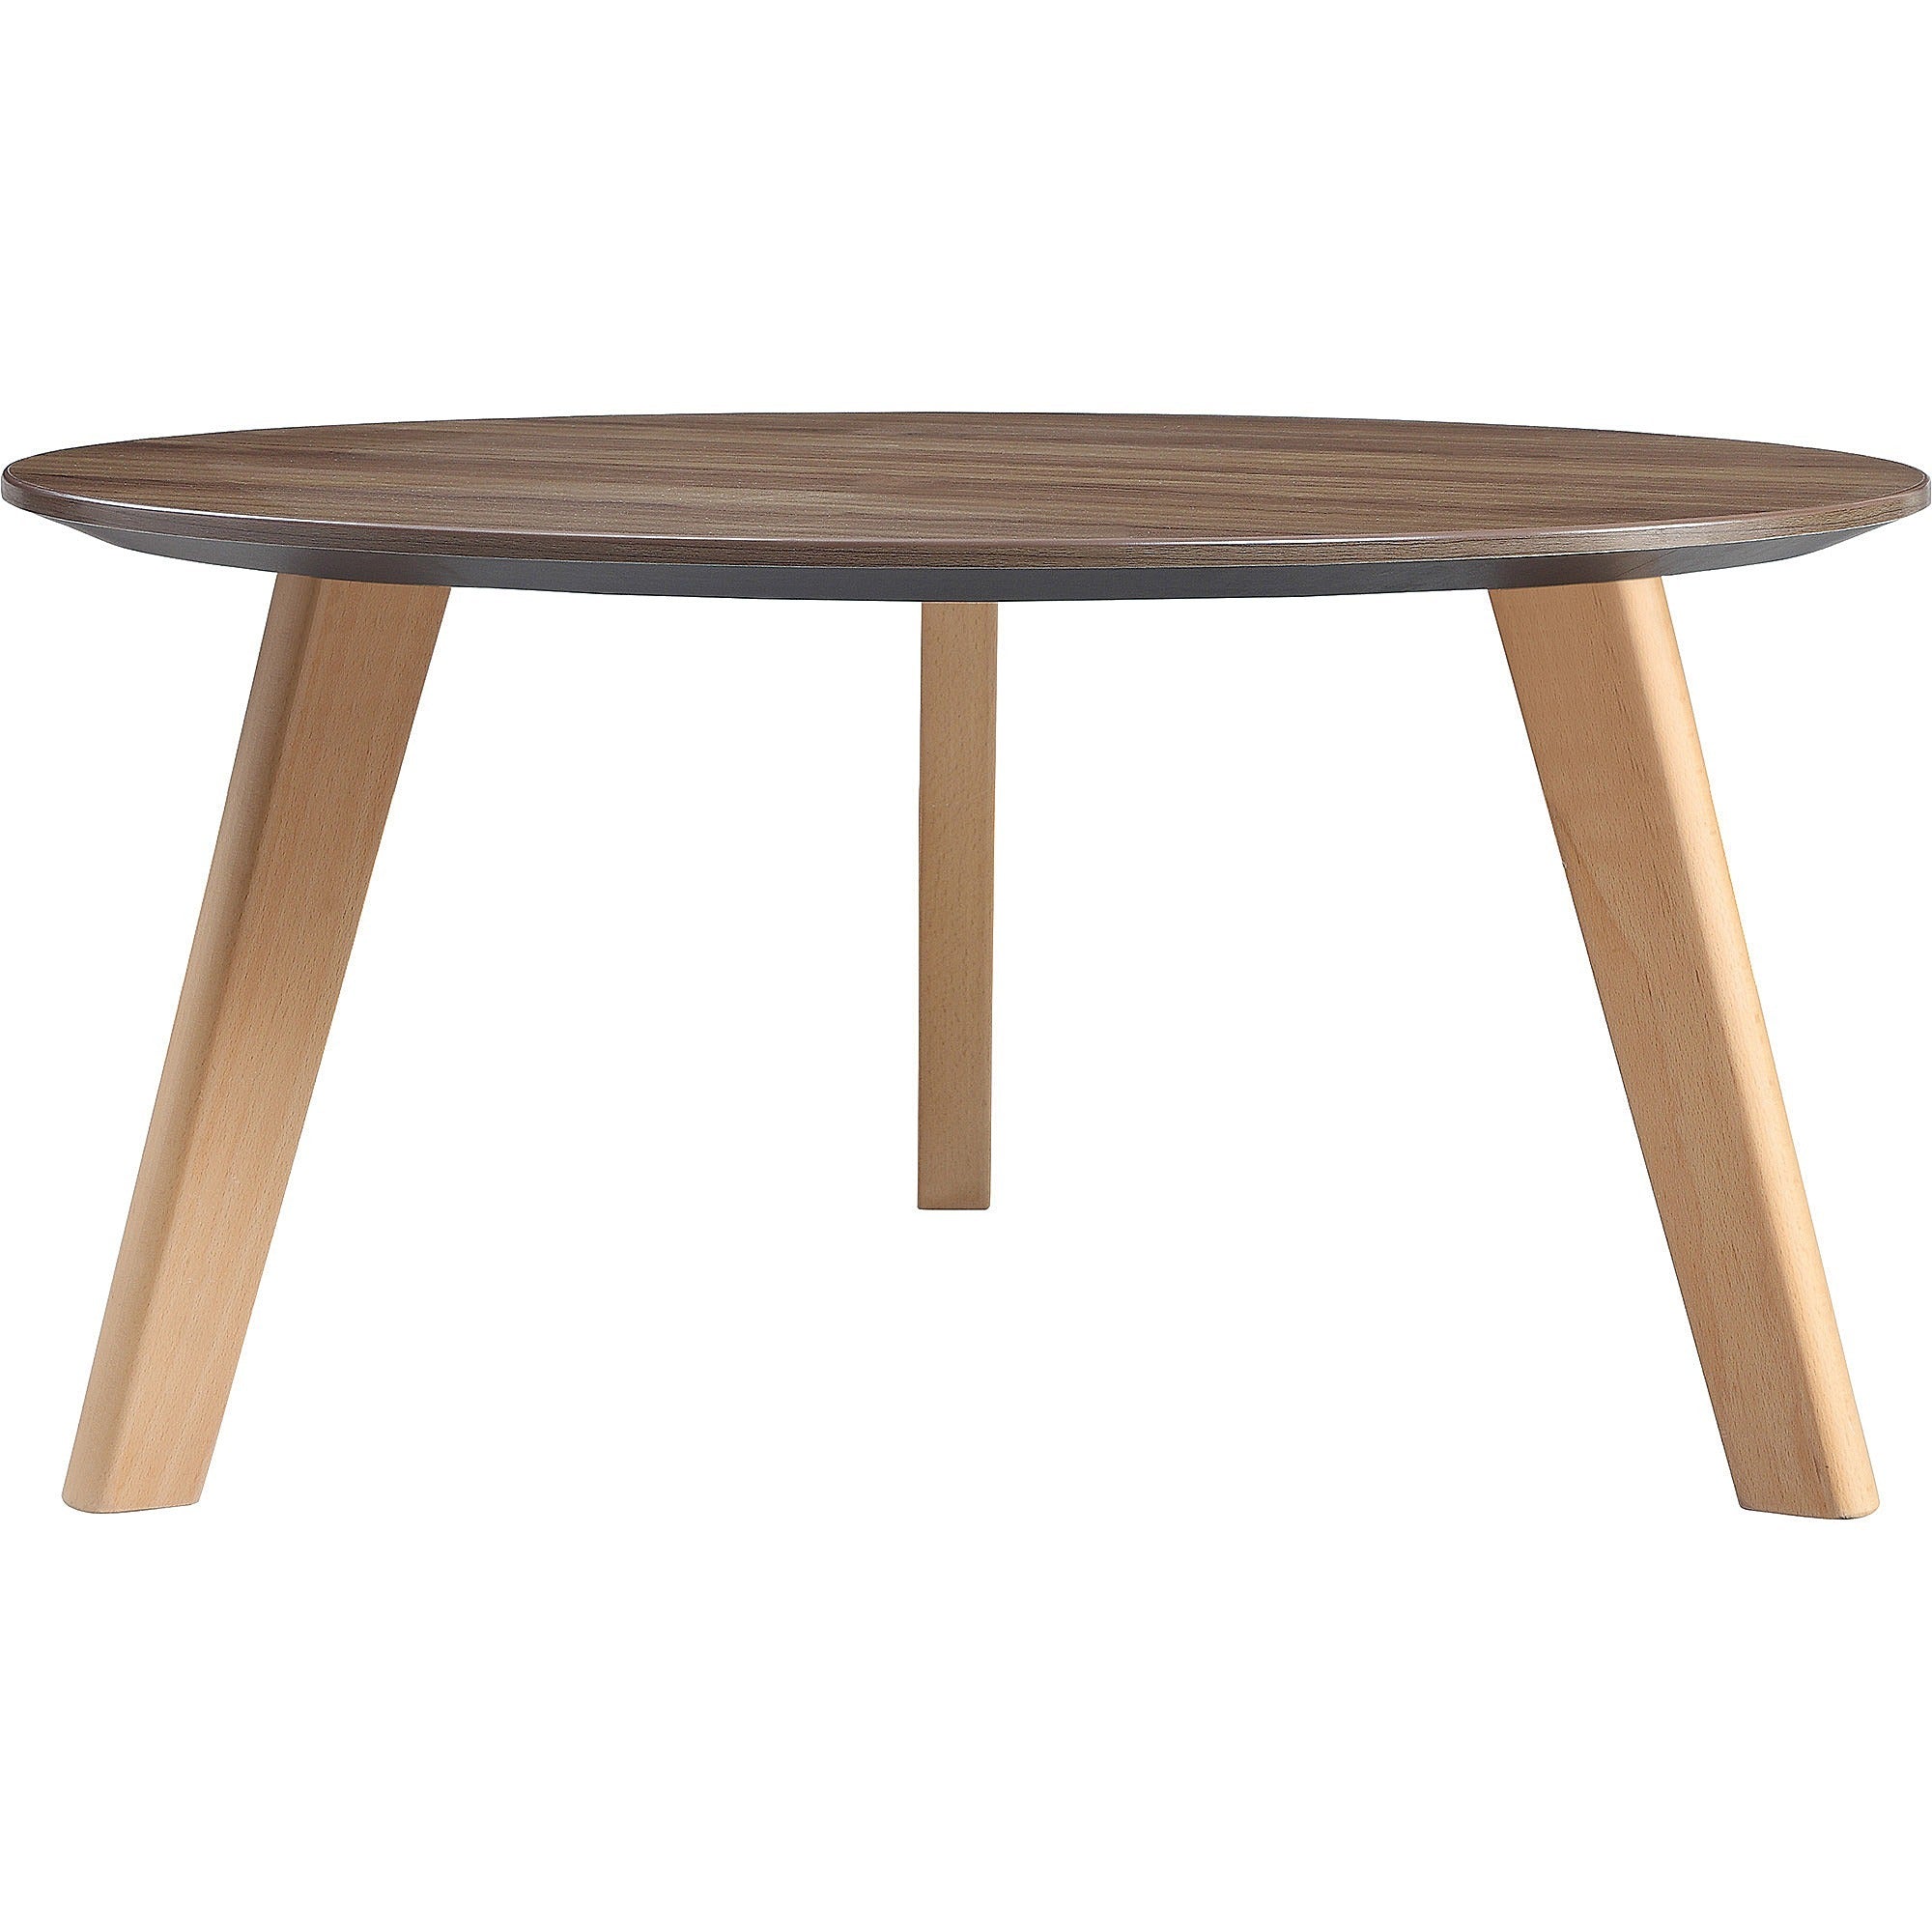 lorell-quintessence-collection-coffee-table-158-x-32-knife-edge-walnut-laminate-table-top_llr16247 - 1